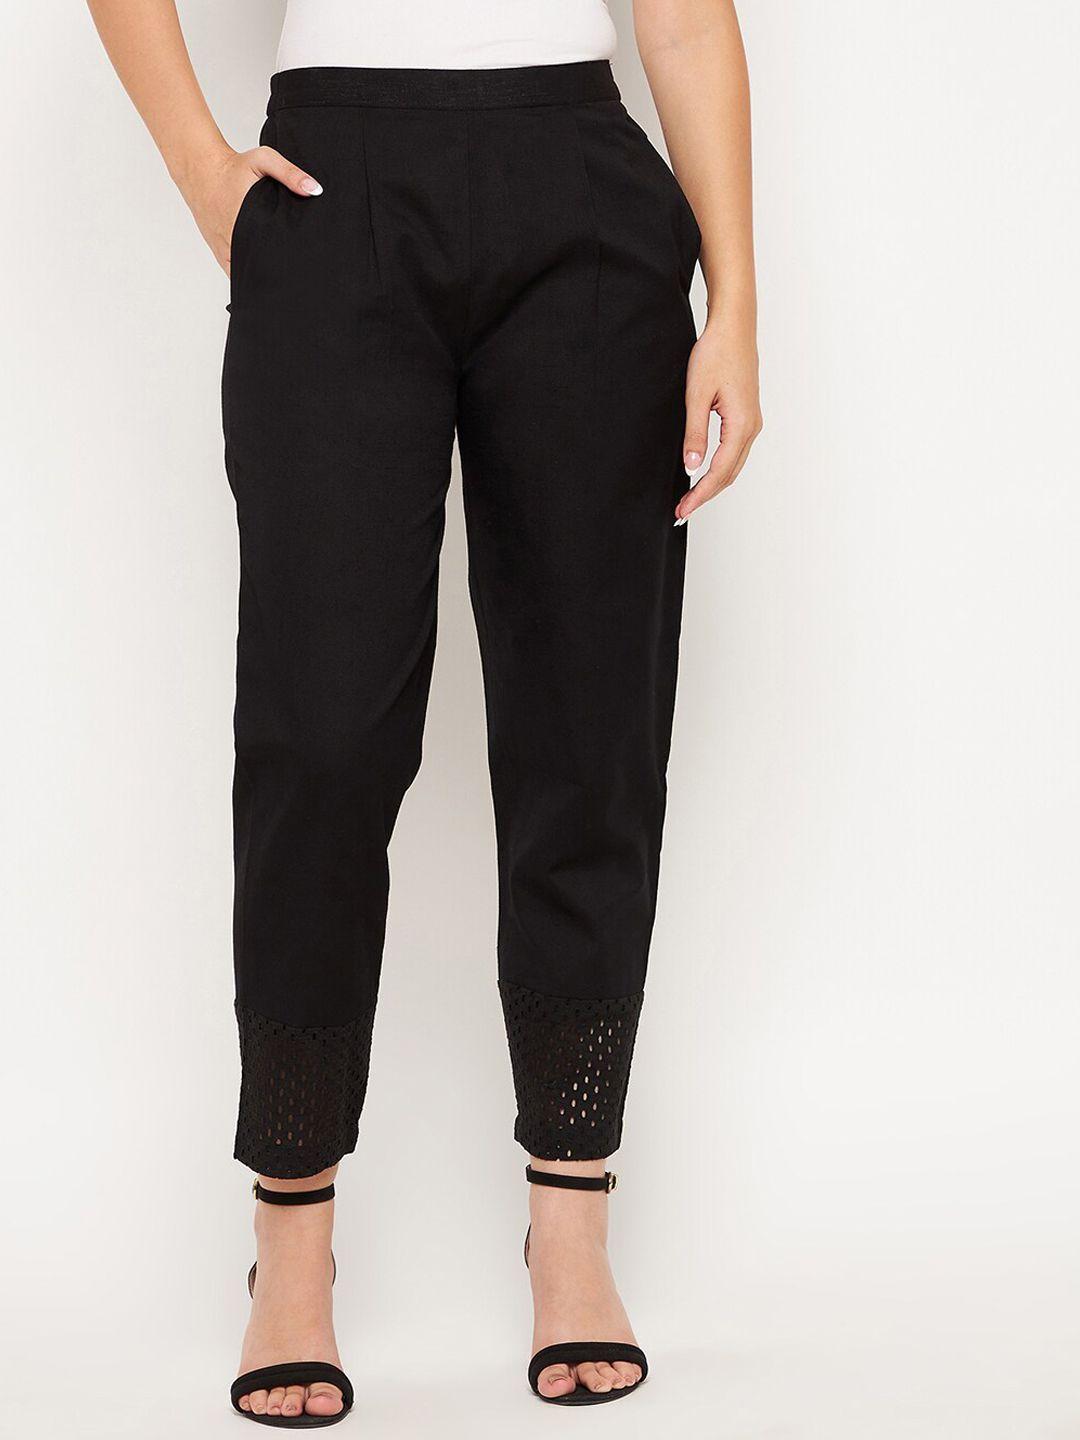 winered-women-black-smart-high-rise-easy-wash-trousers